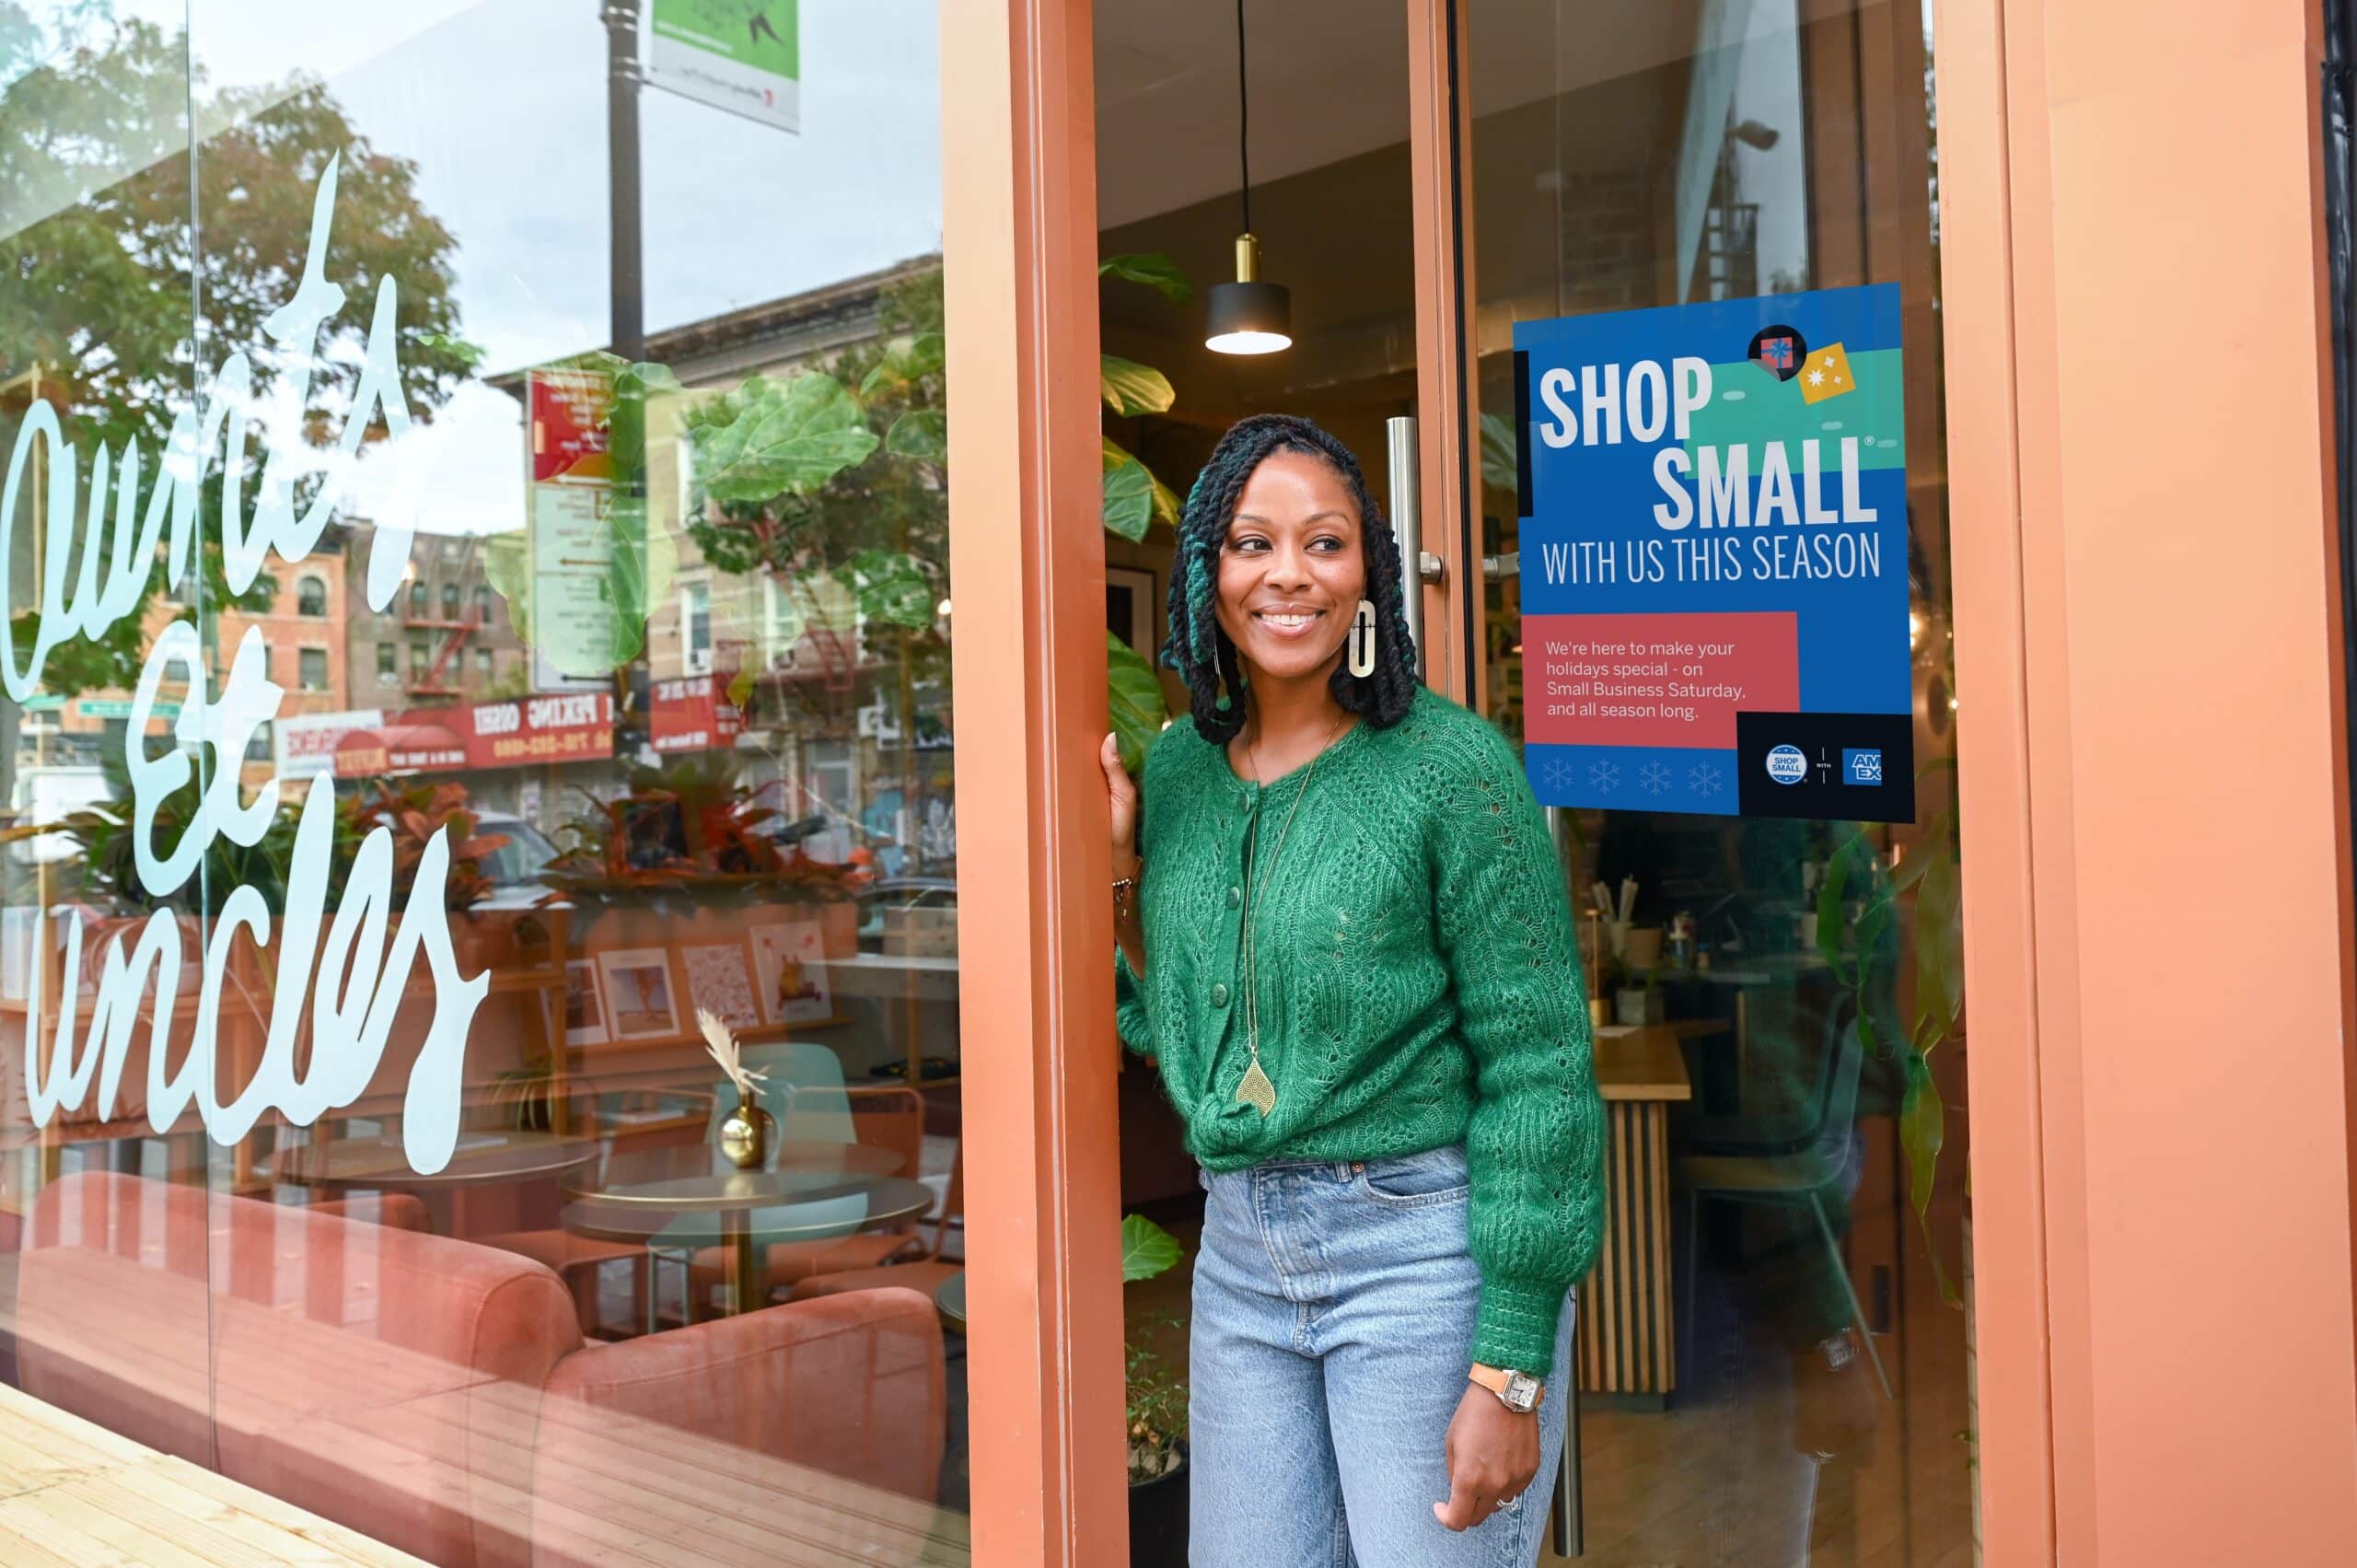 Free Money Grants vs. Small Business Loans: What Option Is Best For You?